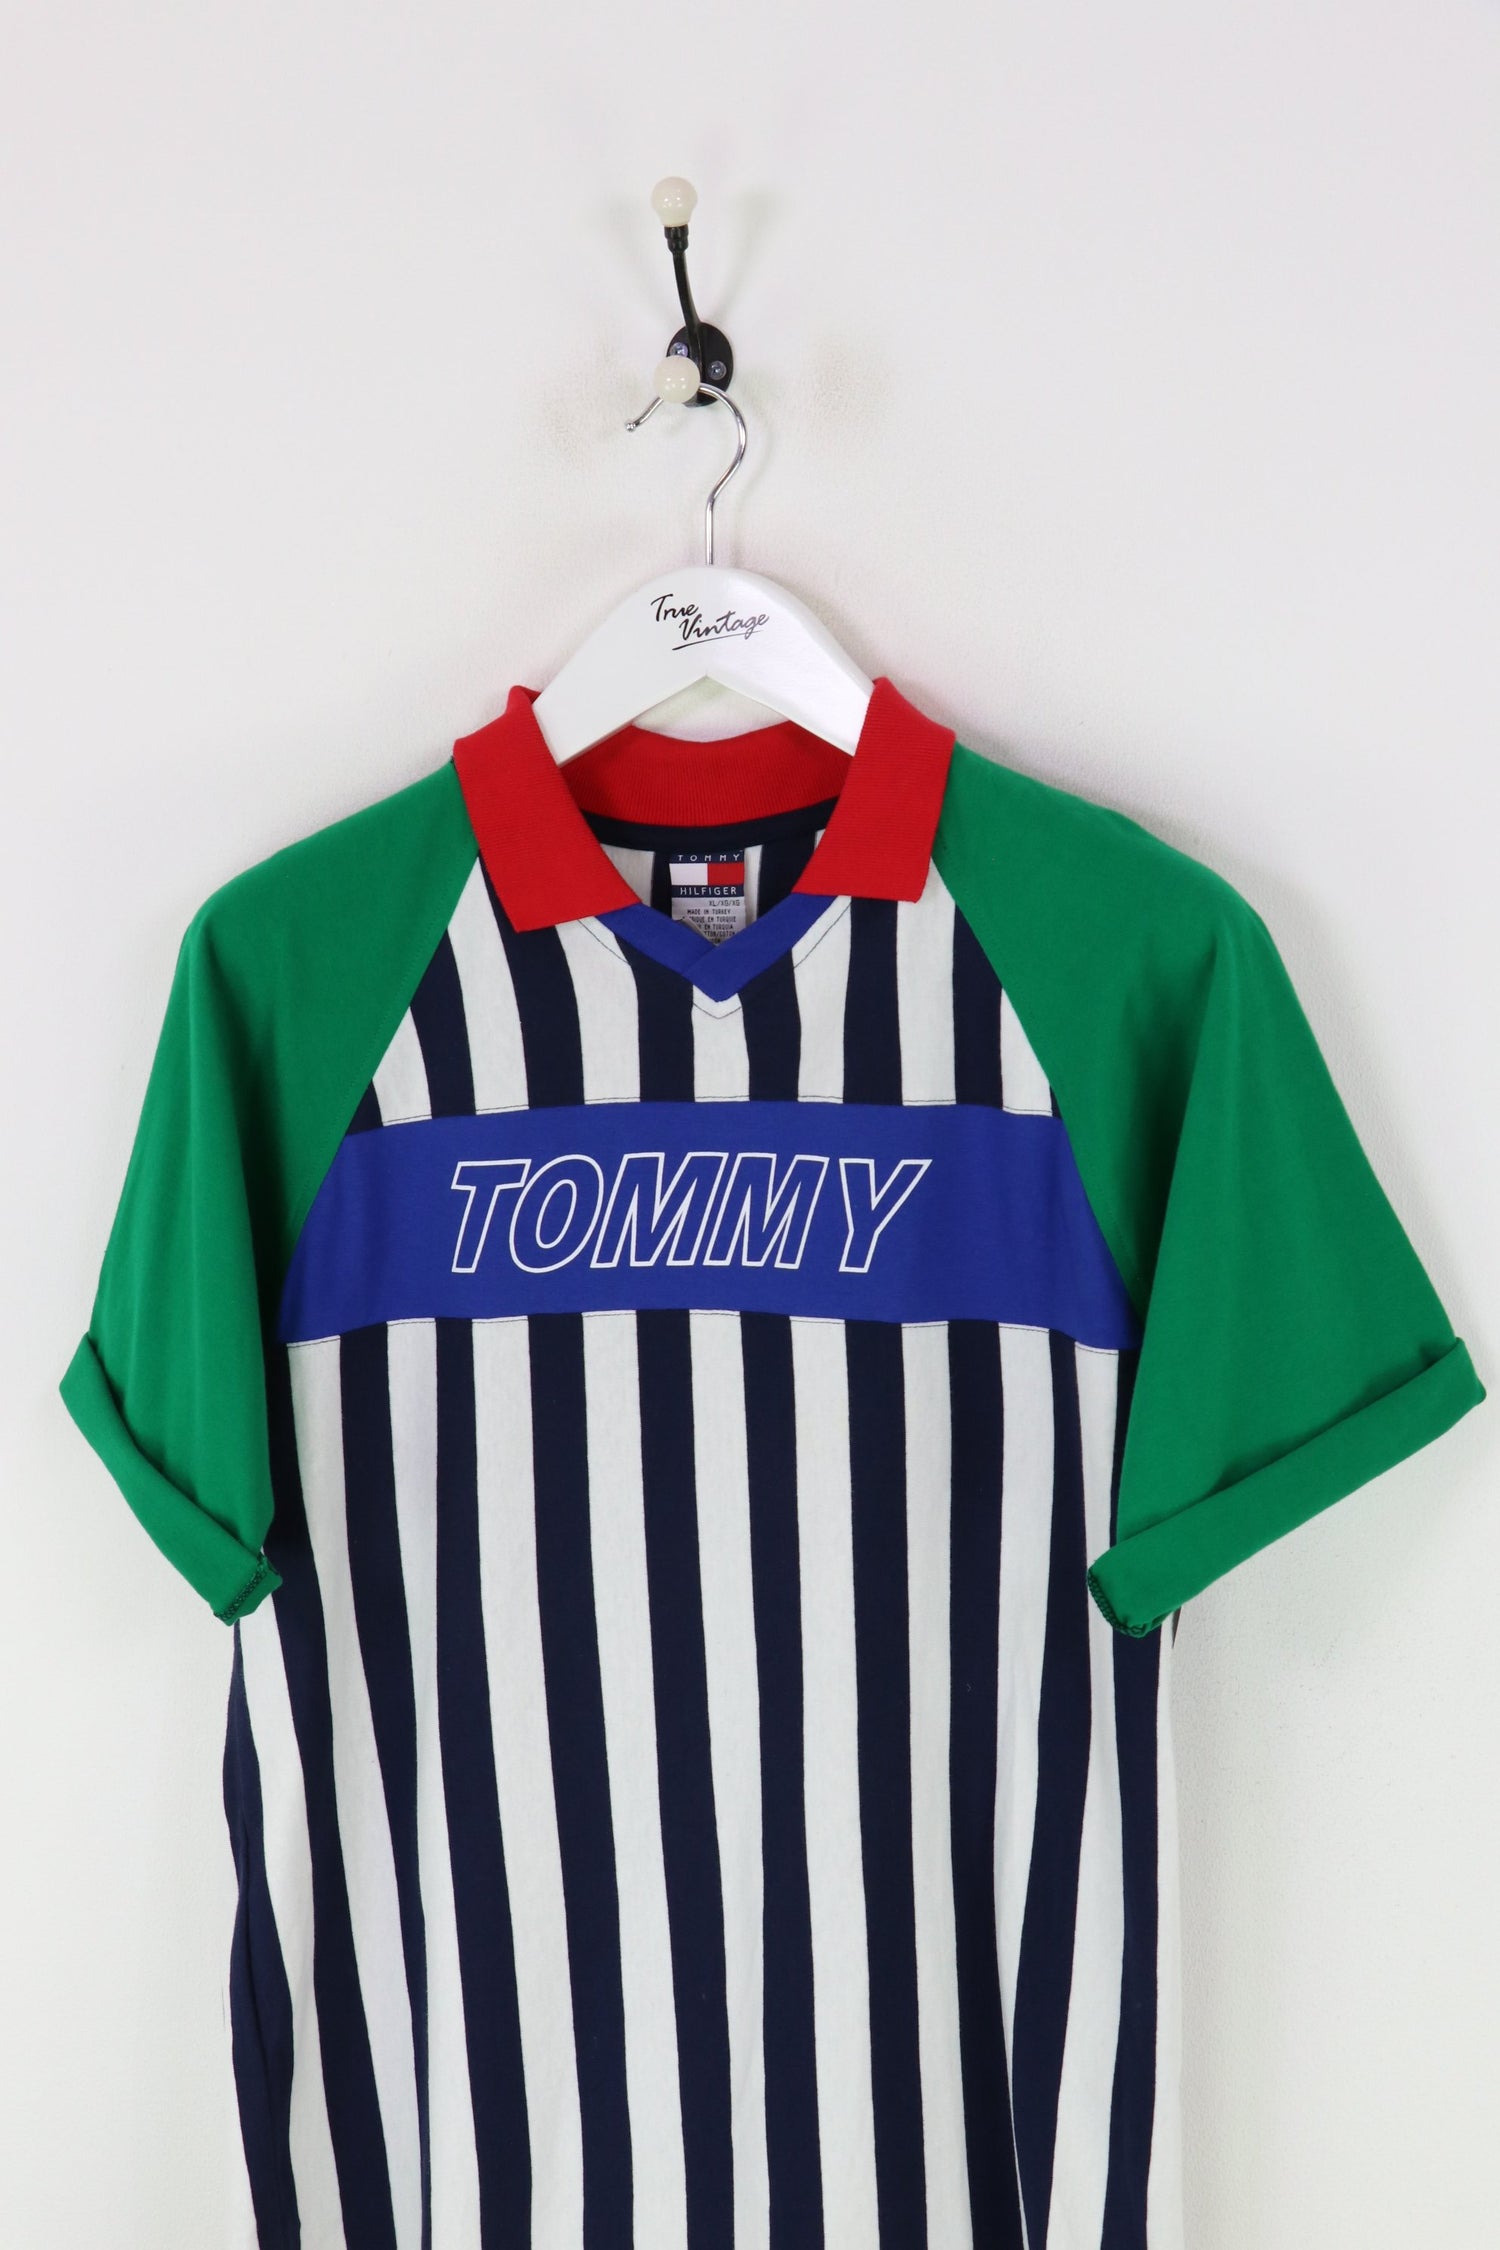 Tommy Hilfiger Polo Shirt White/Navy/Green Large